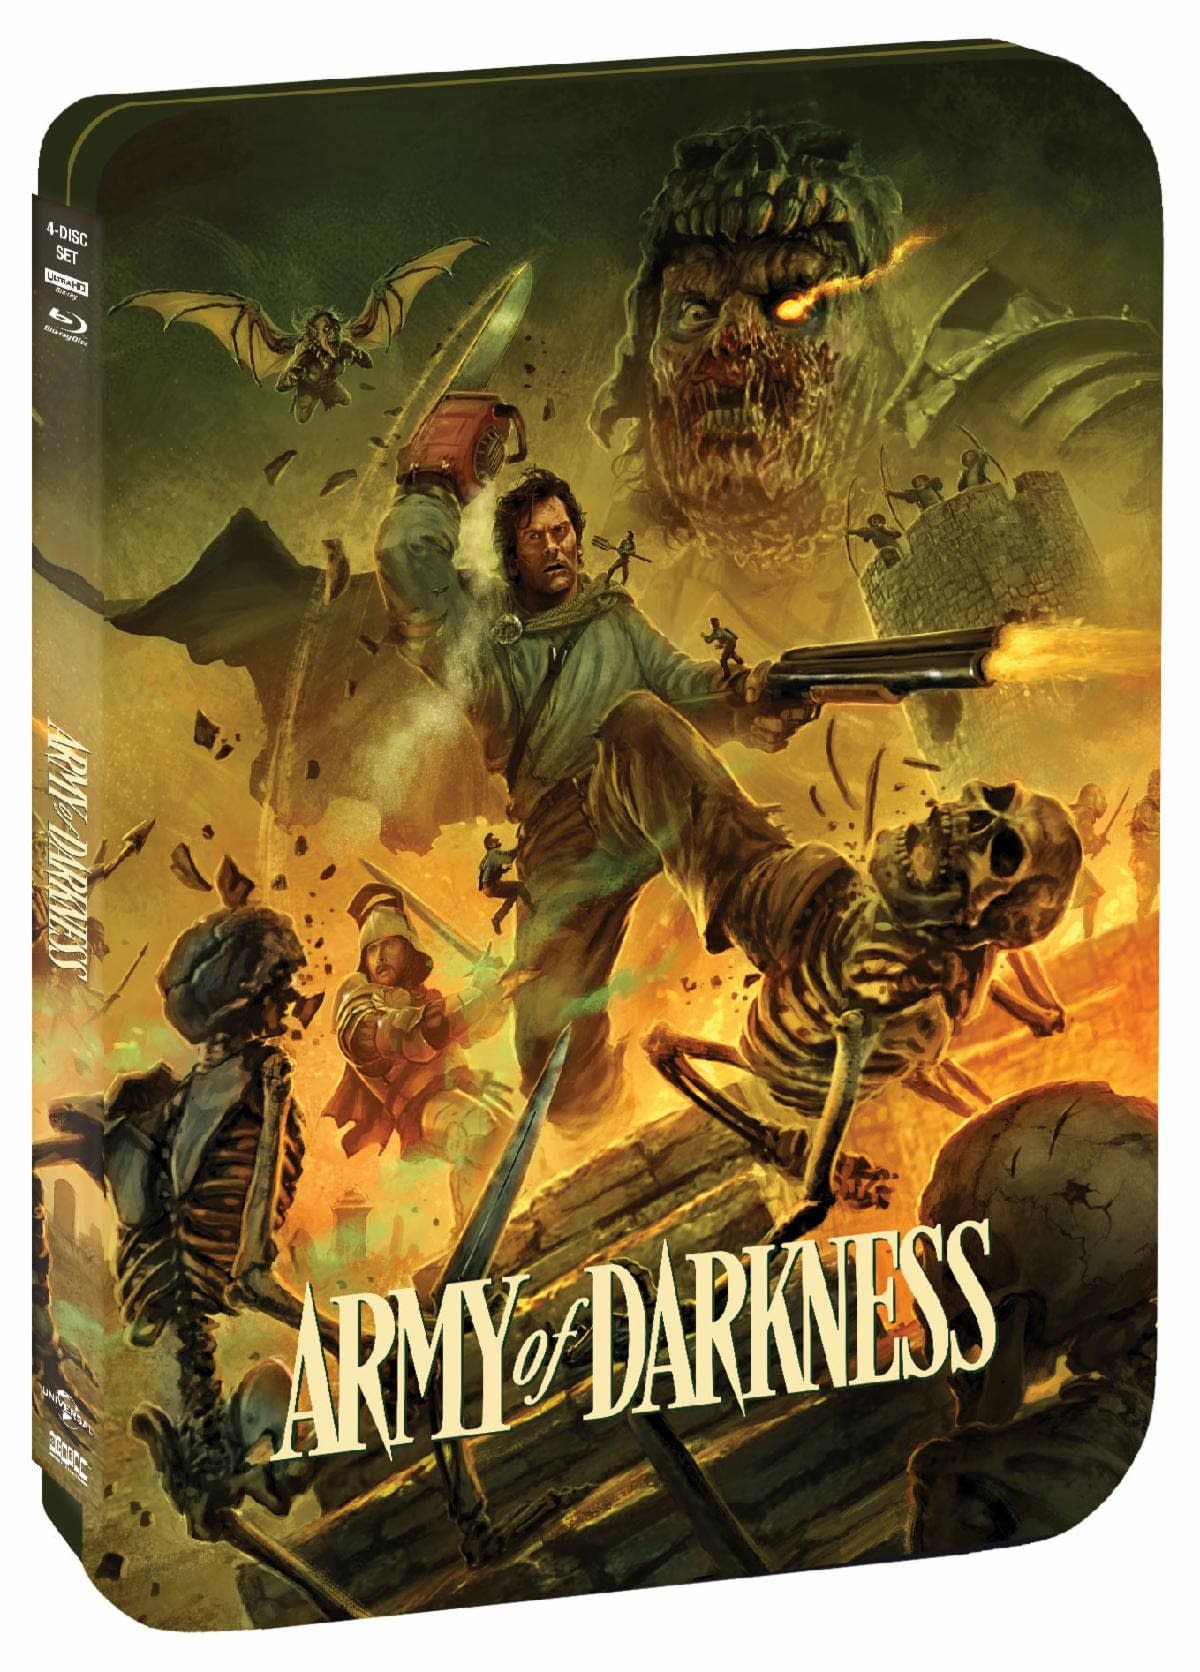 Army Of Darkness Gets Mega- 4K Release In October From Scream Factory